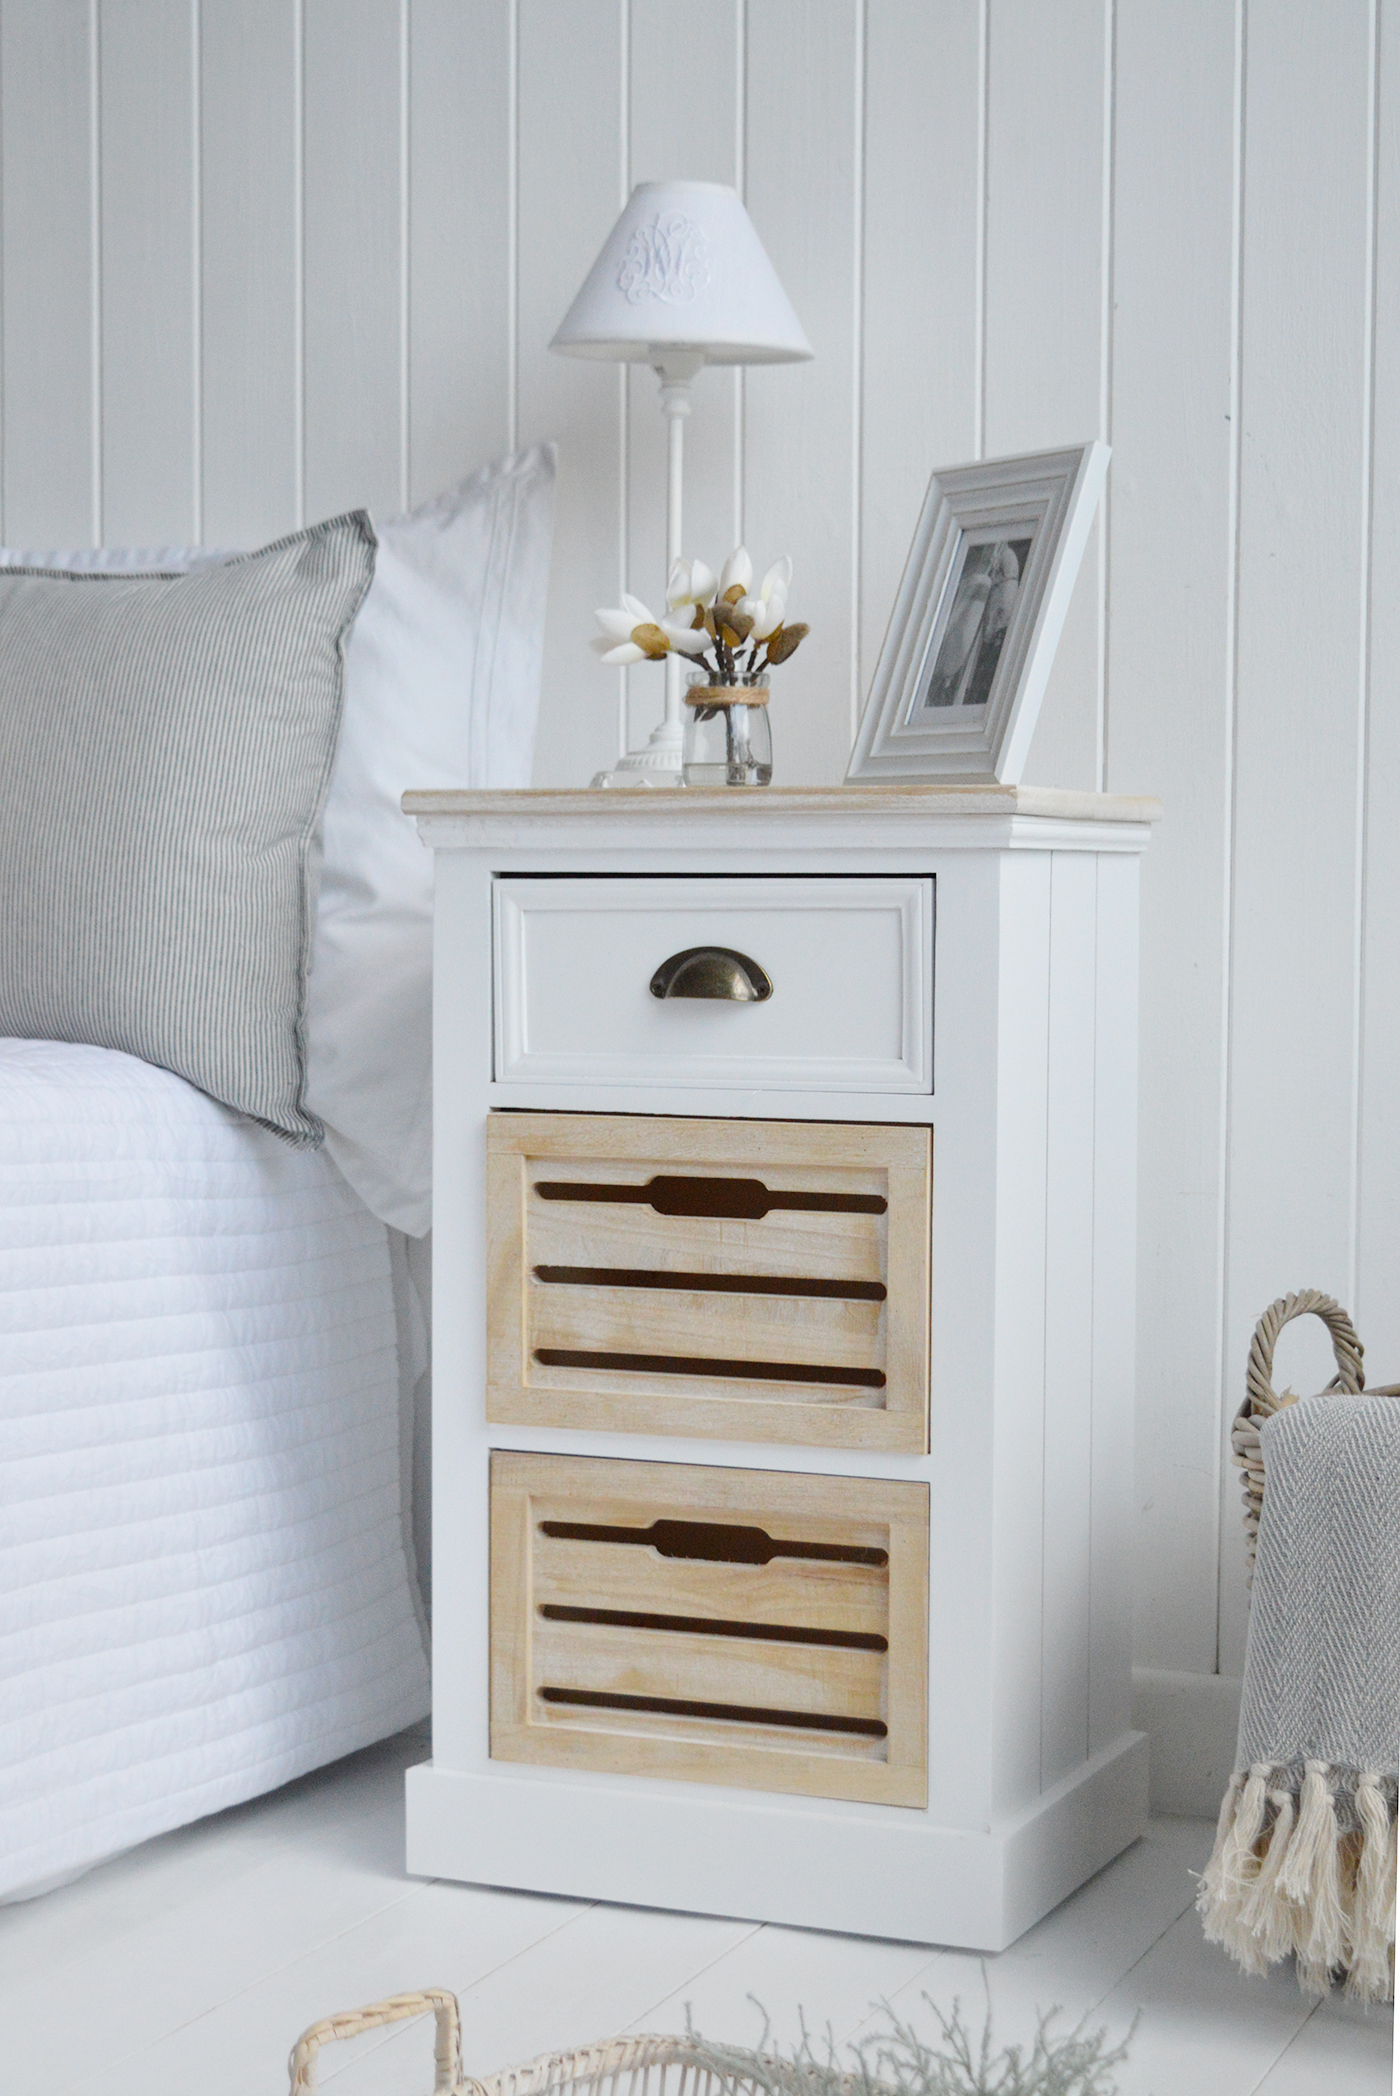 The Southport white bedside table with three drawers in a traditional clapboard finish for a modern coastal feel bedroom interior